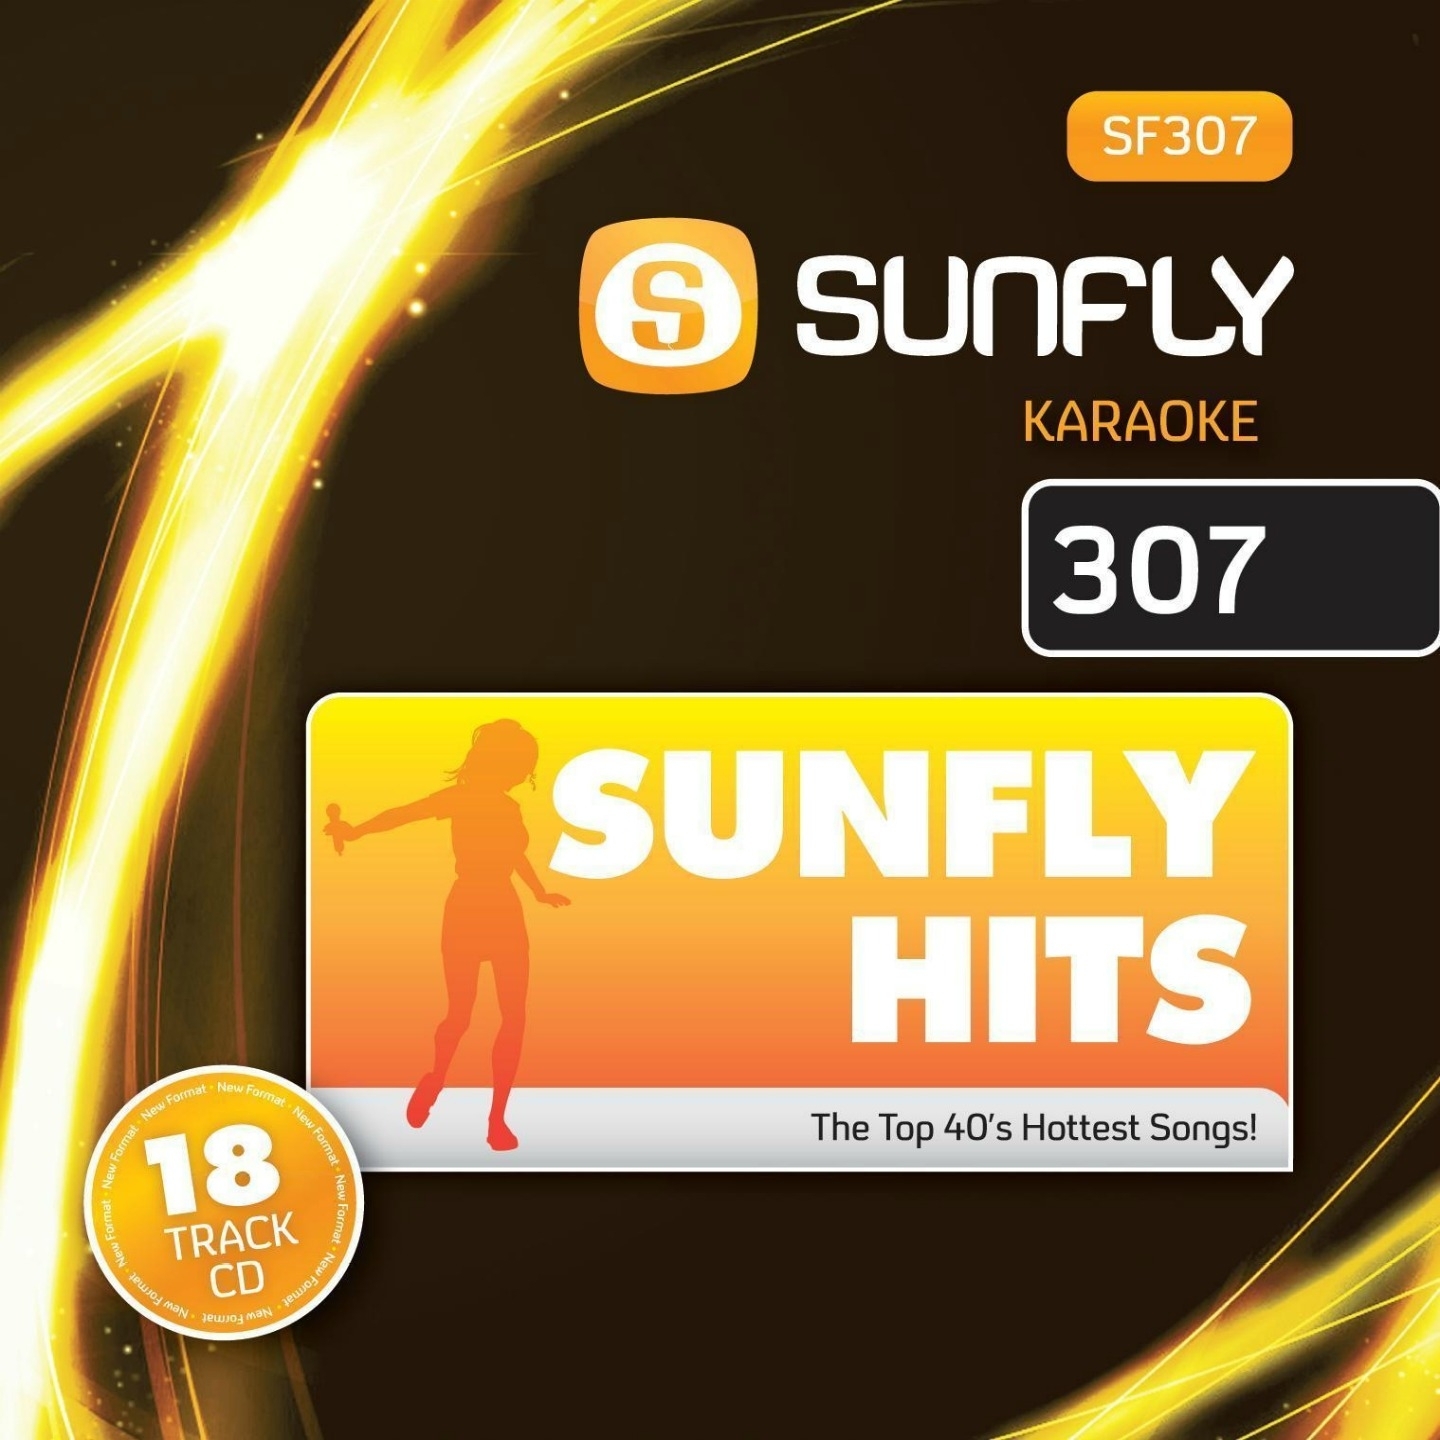 Sunfly Hits 307